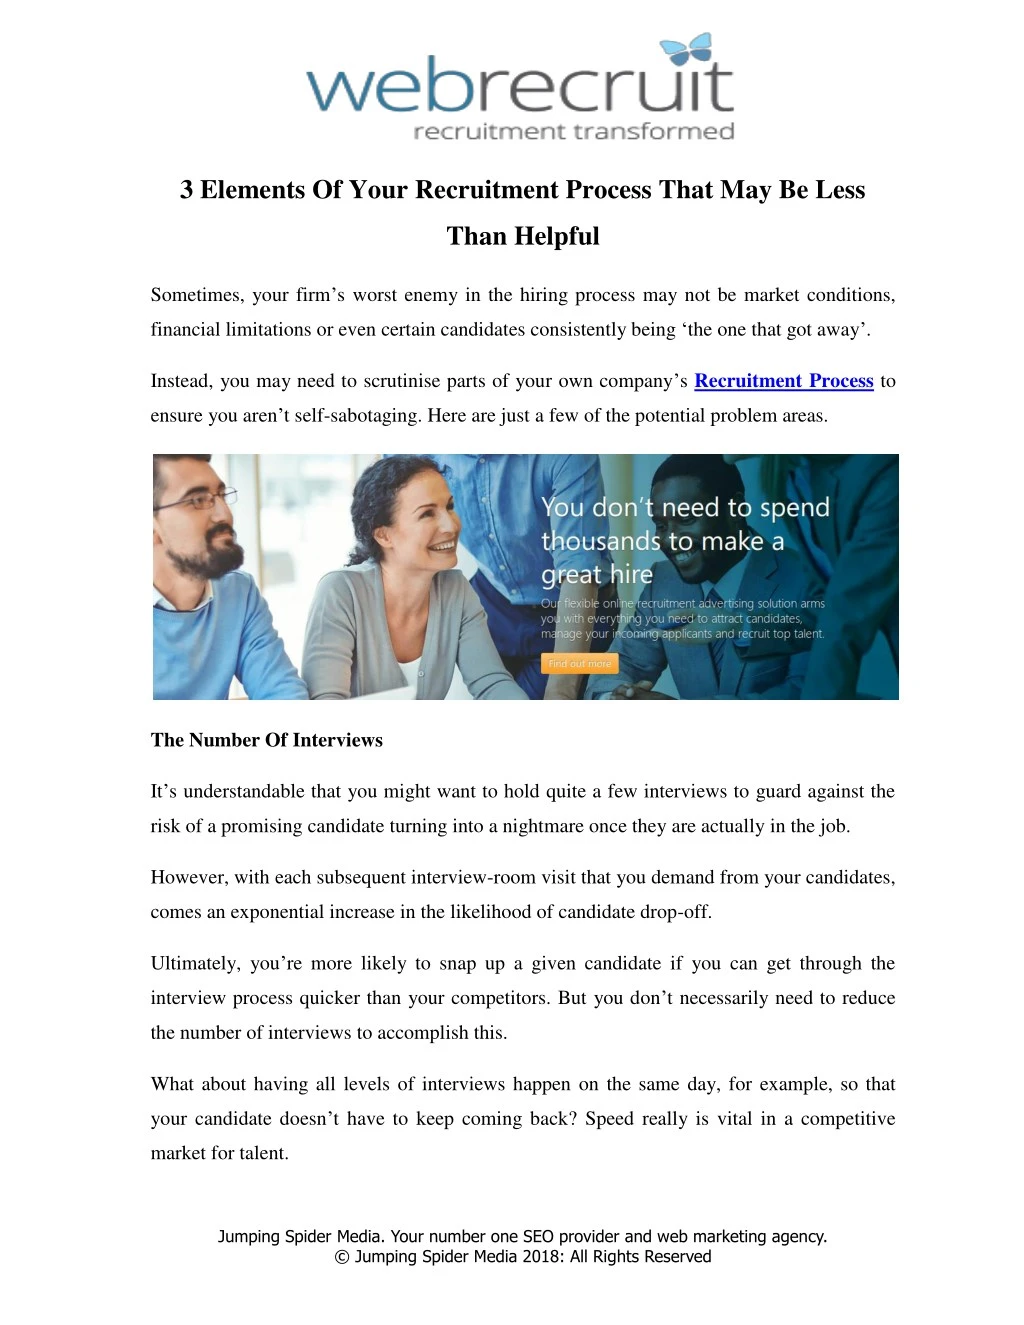 3 elements of your recruitment process that